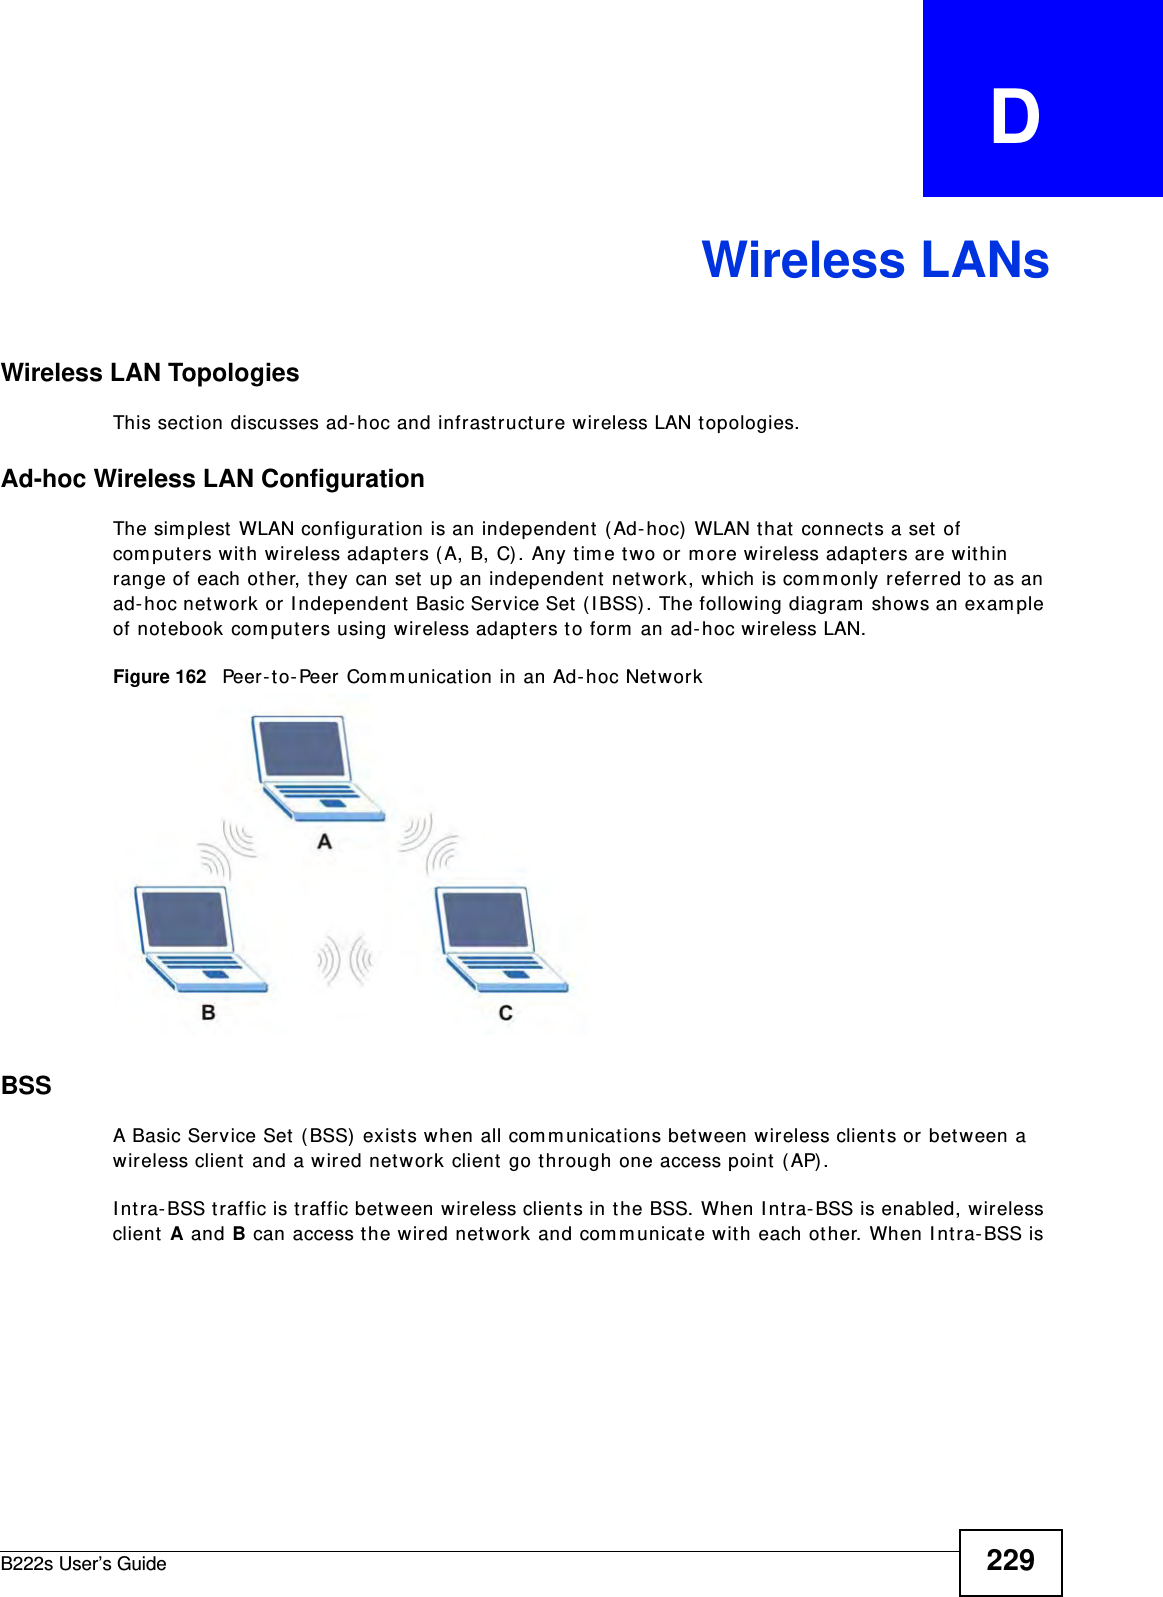 B222s User’s Guide 229APPENDIX   DWireless LANsWireless LAN TopologiesThis sect ion discusses ad- hoc and infrastructure wireless LAN t opologies.Ad-hoc Wireless LAN ConfigurationThe sim plest WLAN configurat ion is an independent  ( Ad- hoc)  WLAN t hat  connects a set of com puters wit h wireless adapt ers ( A, B, C). Any t im e t wo or m ore wireless adapt ers are within range of each other, t hey can set up an independent  net w ork, which is com m only referred to as an ad- hoc net work or I ndependent  Basic Service Set  ( I BSS) . The following diagram  show s an exam ple of not ebook com put ers using wireless adapt ers t o for m  an ad- hoc wireless LAN. Figure 162   Peer- t o- Peer Com m unicat ion in an Ad- hoc NetworkBSSA Basic Service Set ( BSS)  exists when all com m unicat ions bet ween wireless client s or bet w een a wir eless client  and a wired net work client go t hrough one access point (AP) . I nt ra- BSS t raffic is t raffic bet ween wireless client s in t he BSS. When I nt ra- BSS is enabled, wireless client A and B can access t he wired network and com m unicate with each ot her. When I nt ra- BSS is 